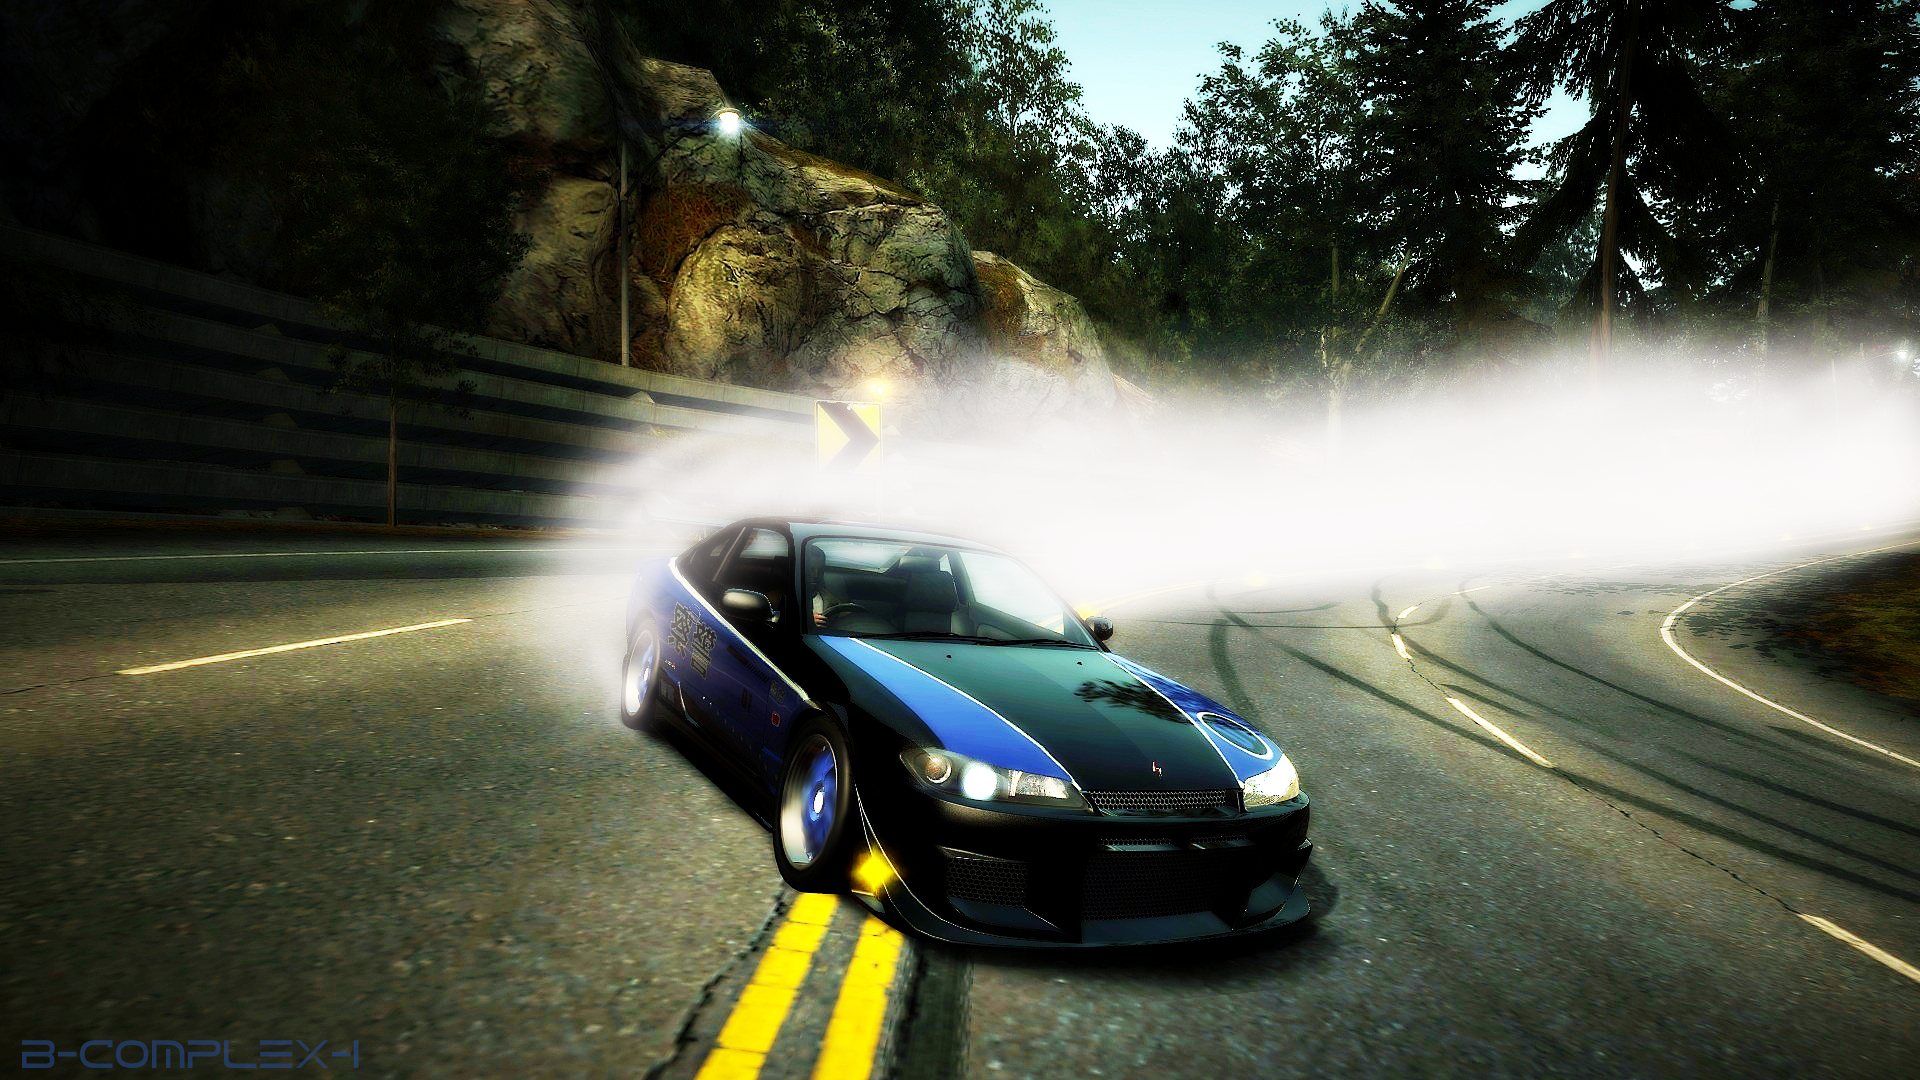 Gallery For Nfs World Backgrounds